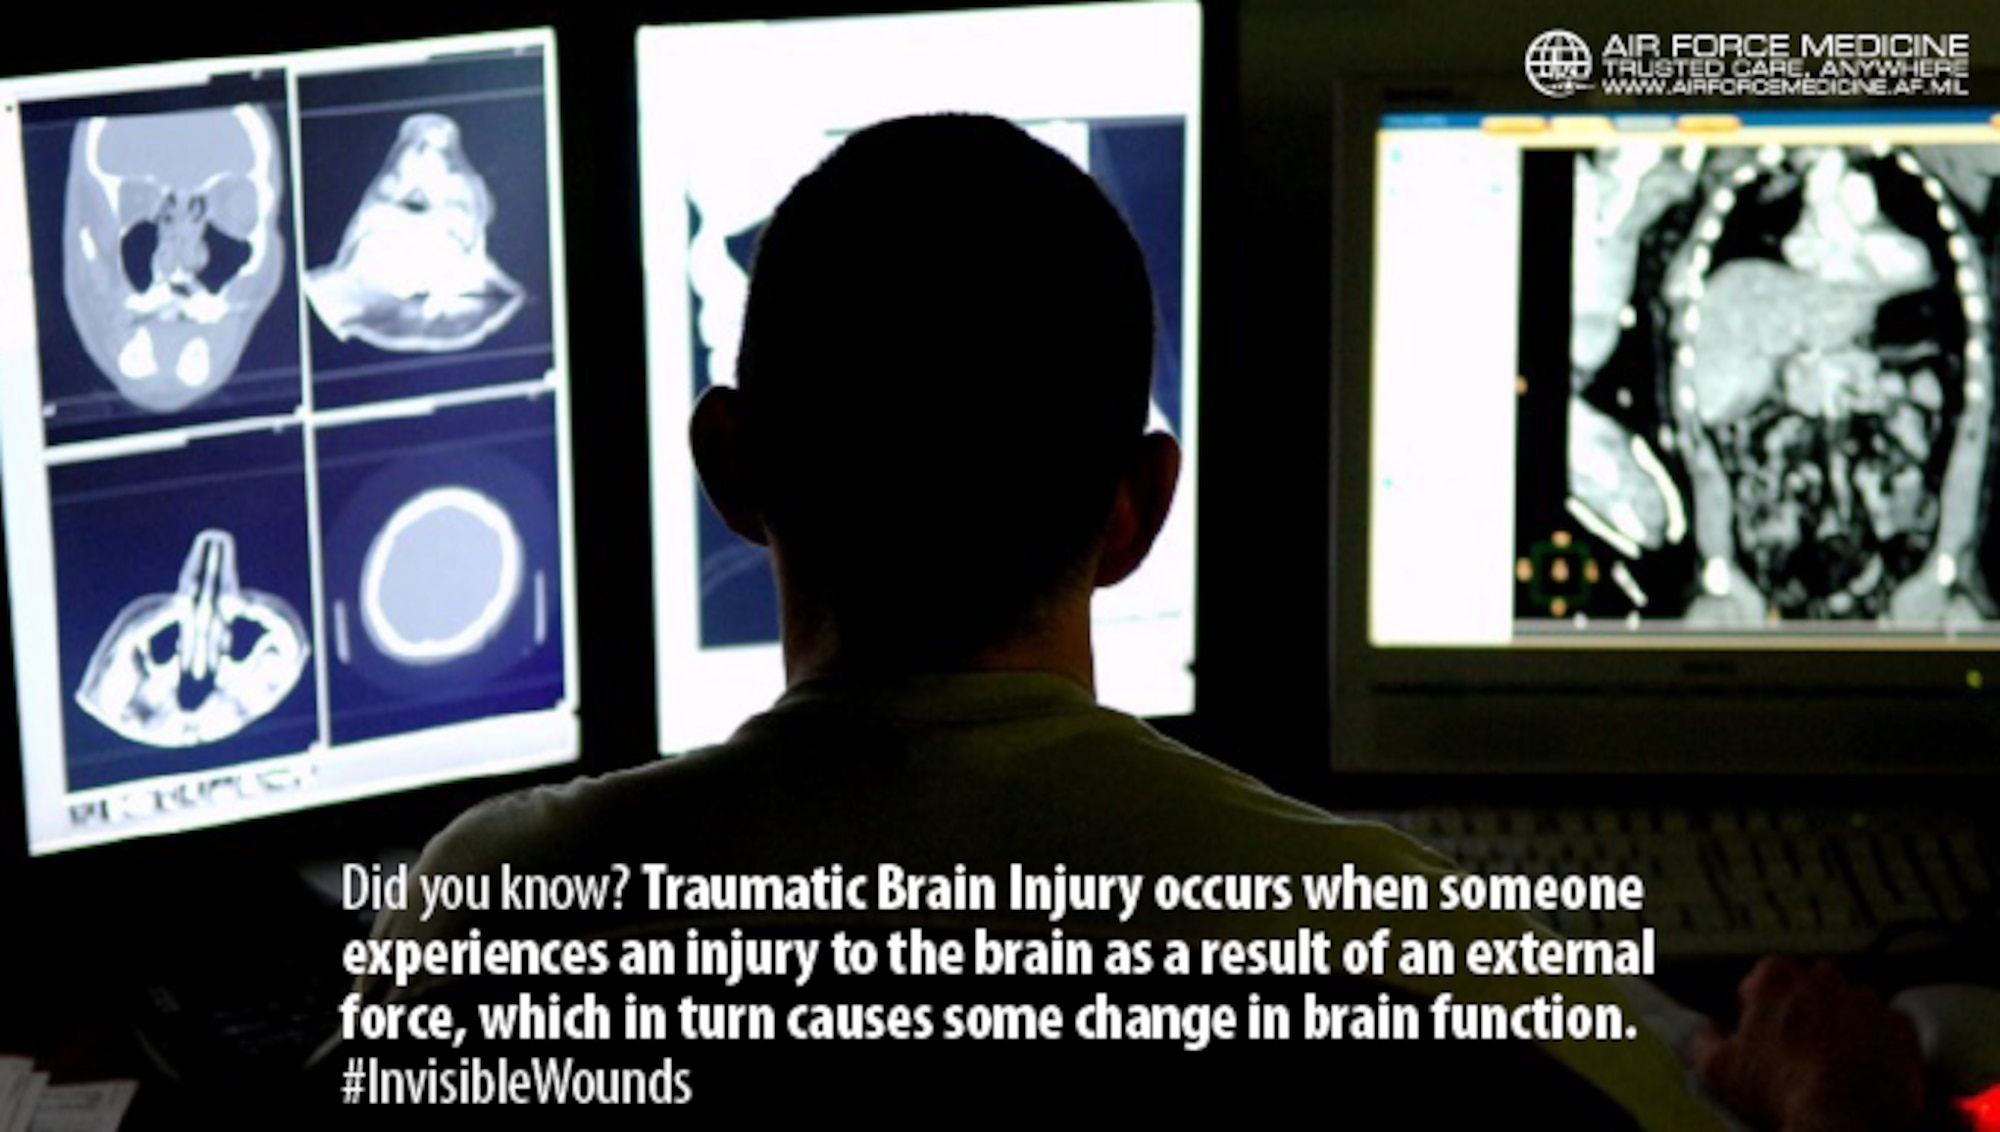 Traumatic Brain Injury (TBI) can be difficult to detect with its typical lack of physical markers. Knowing the signs and symptoms of TBI is critical and ensures Airmen can return to duty. (U.S. Air Force photo)